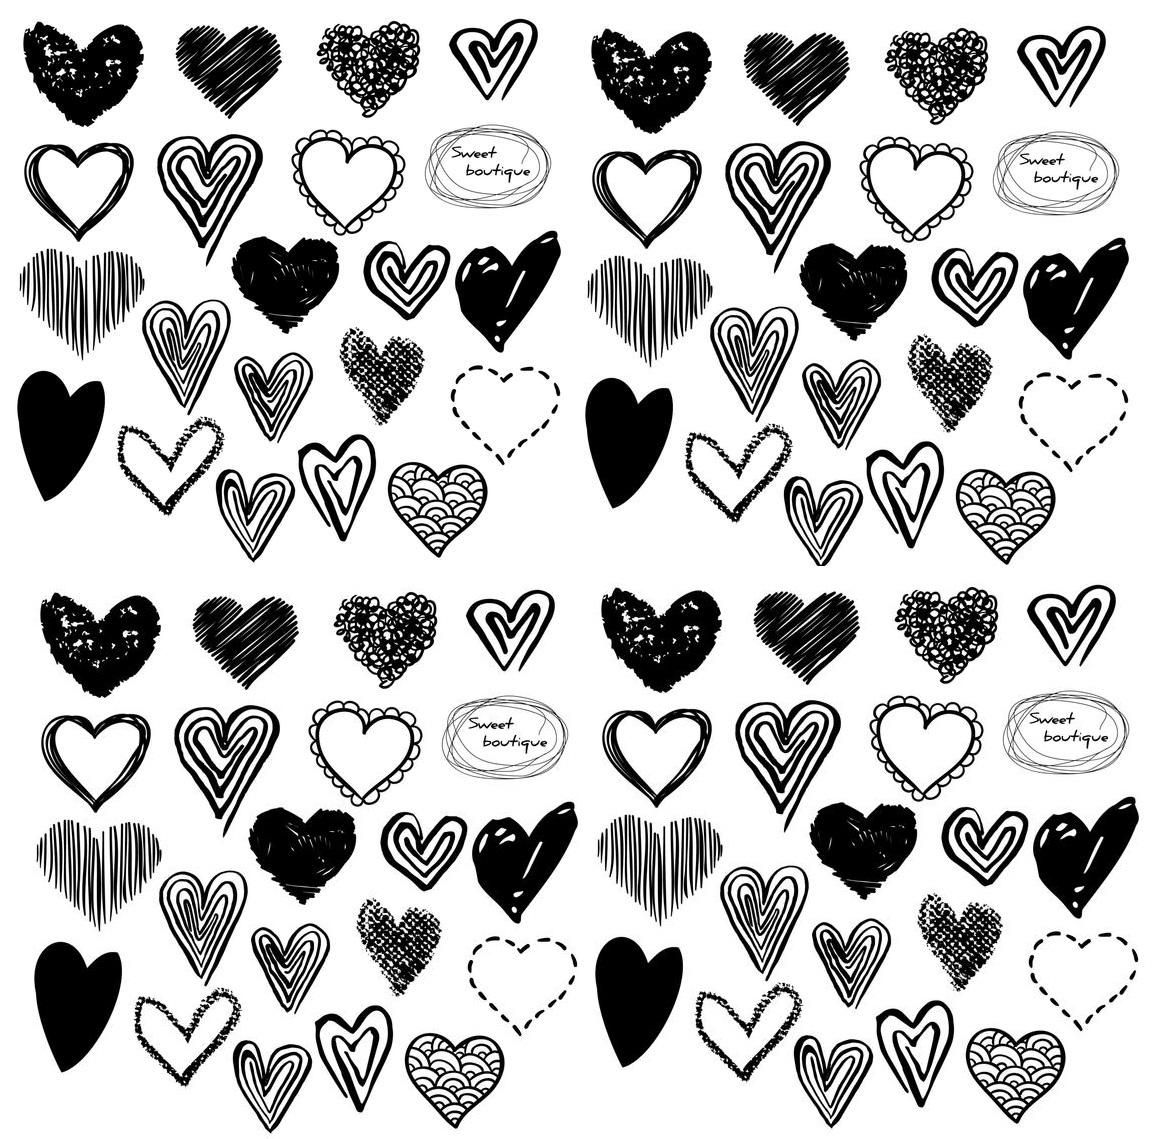 heart clipart black and white small